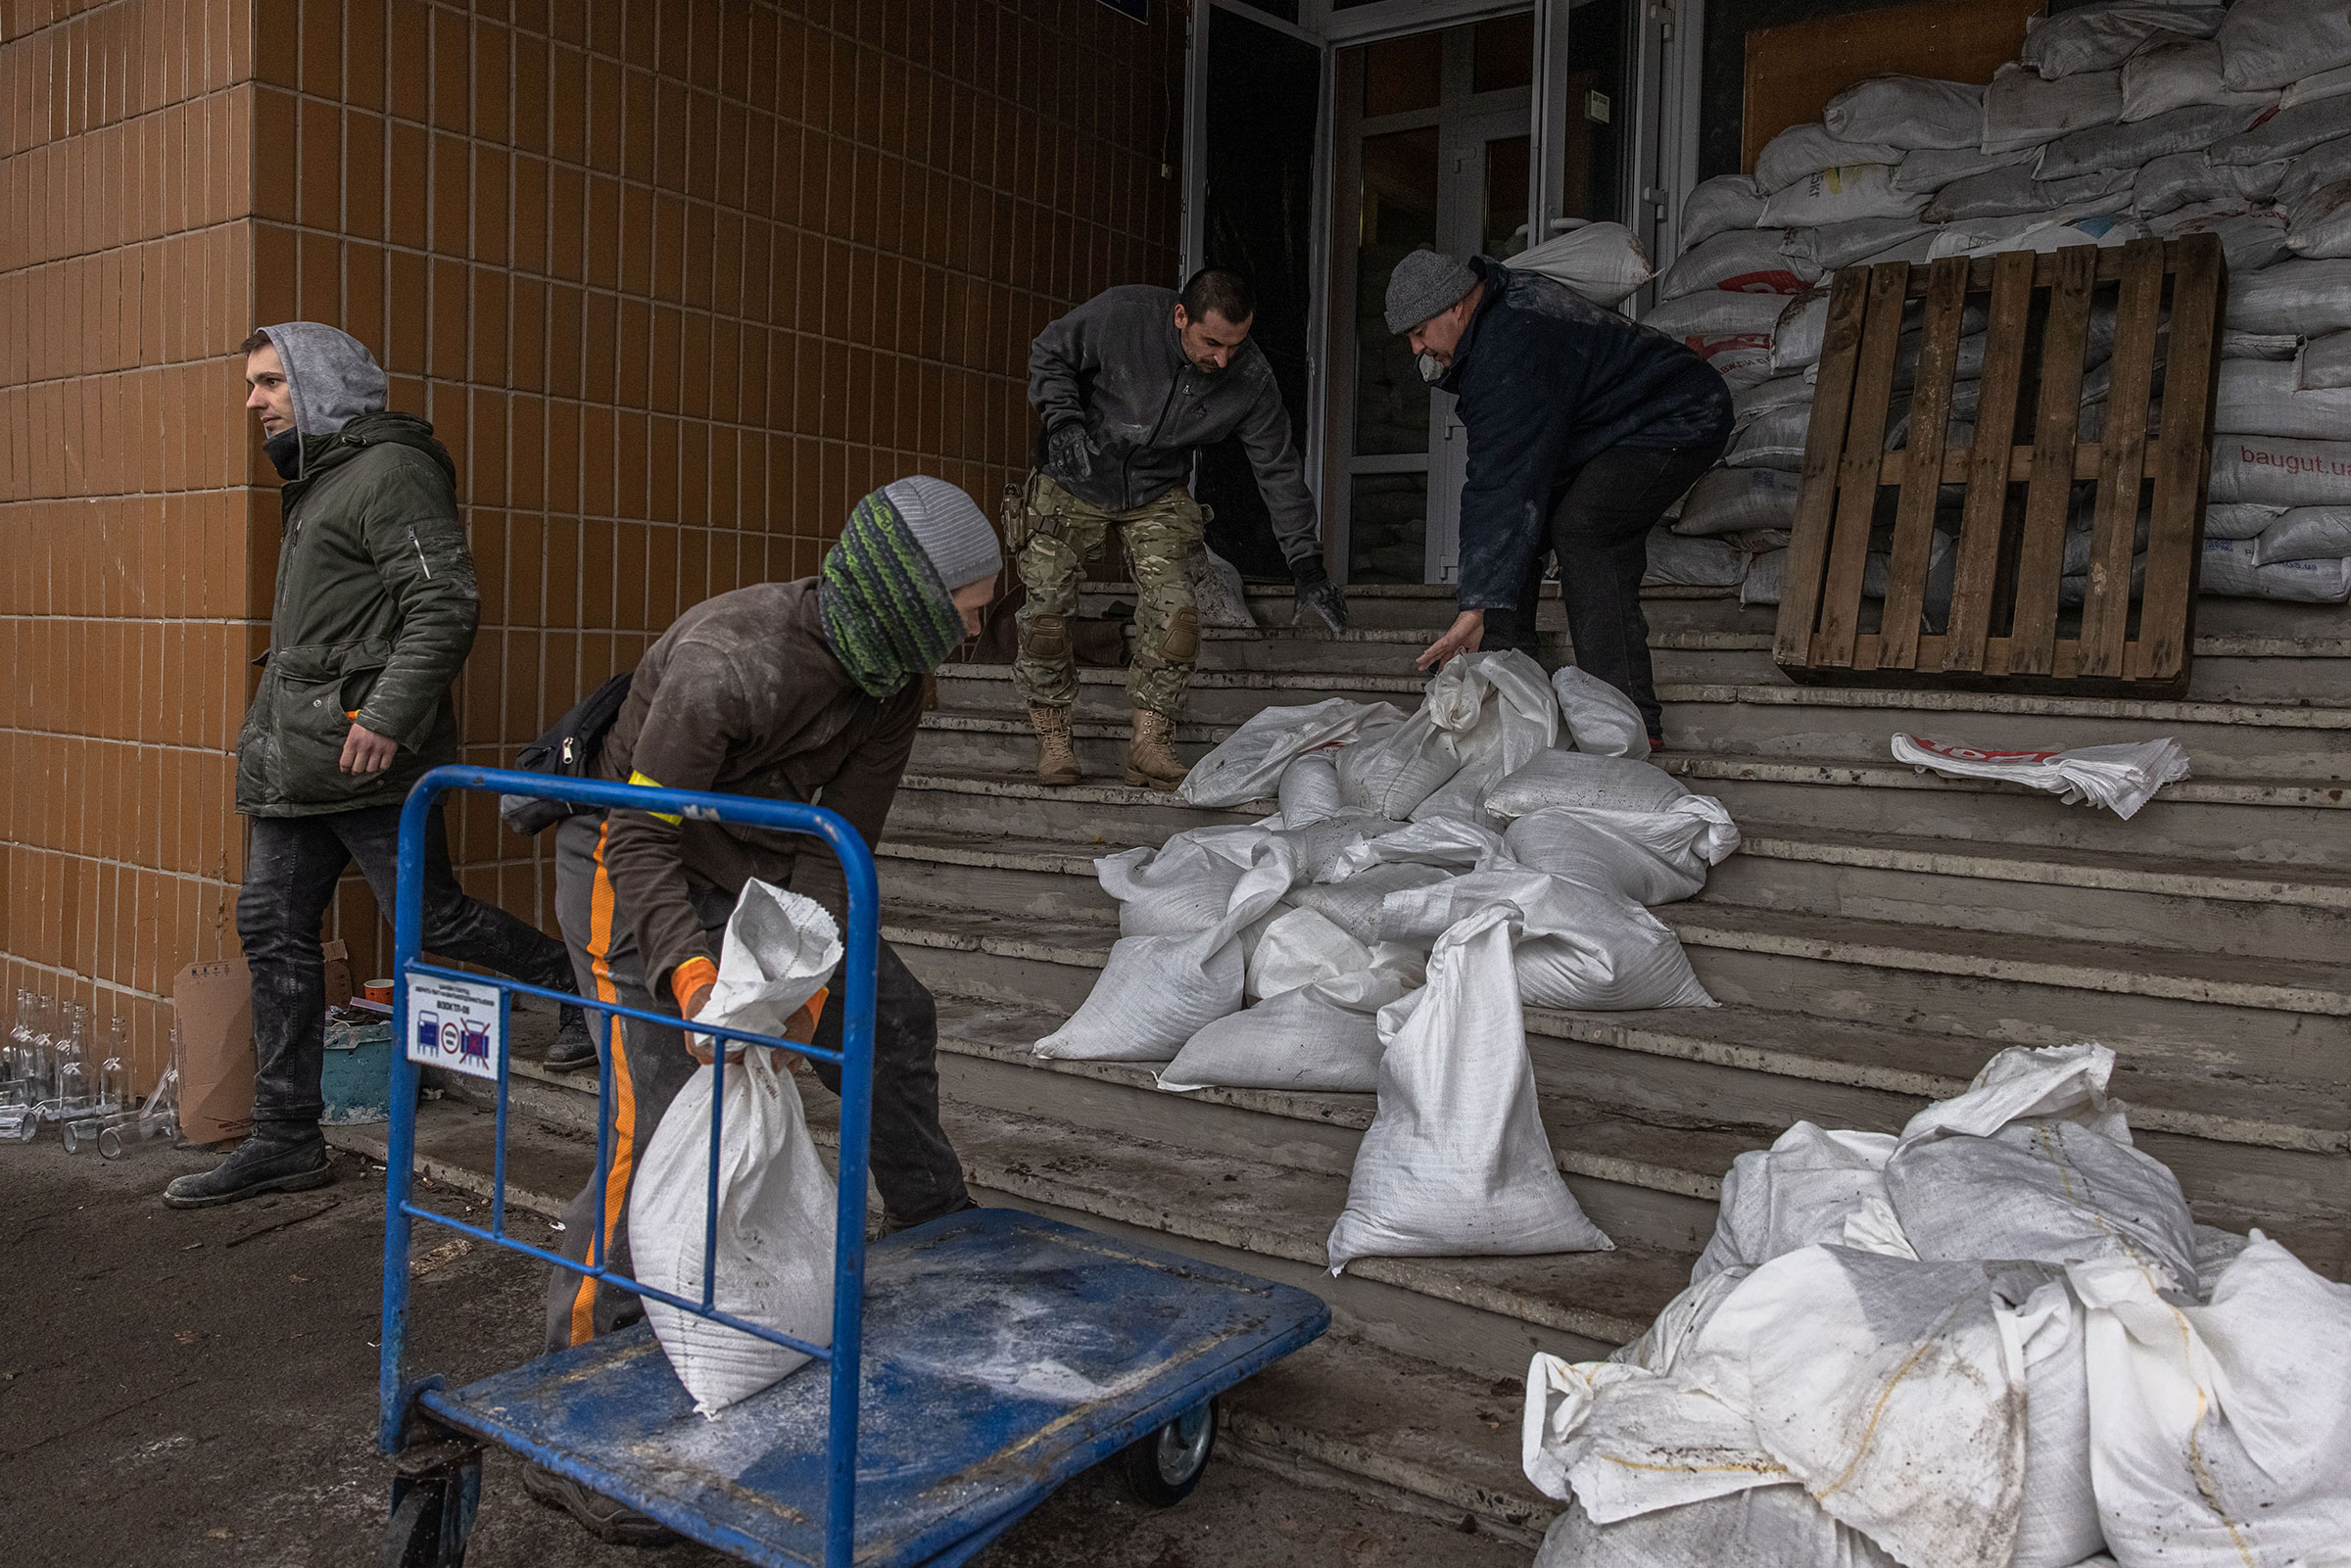 Members of Ukrainian Territorial Defense Forces barricade an entrance to their base, in Kyiv on March 2.